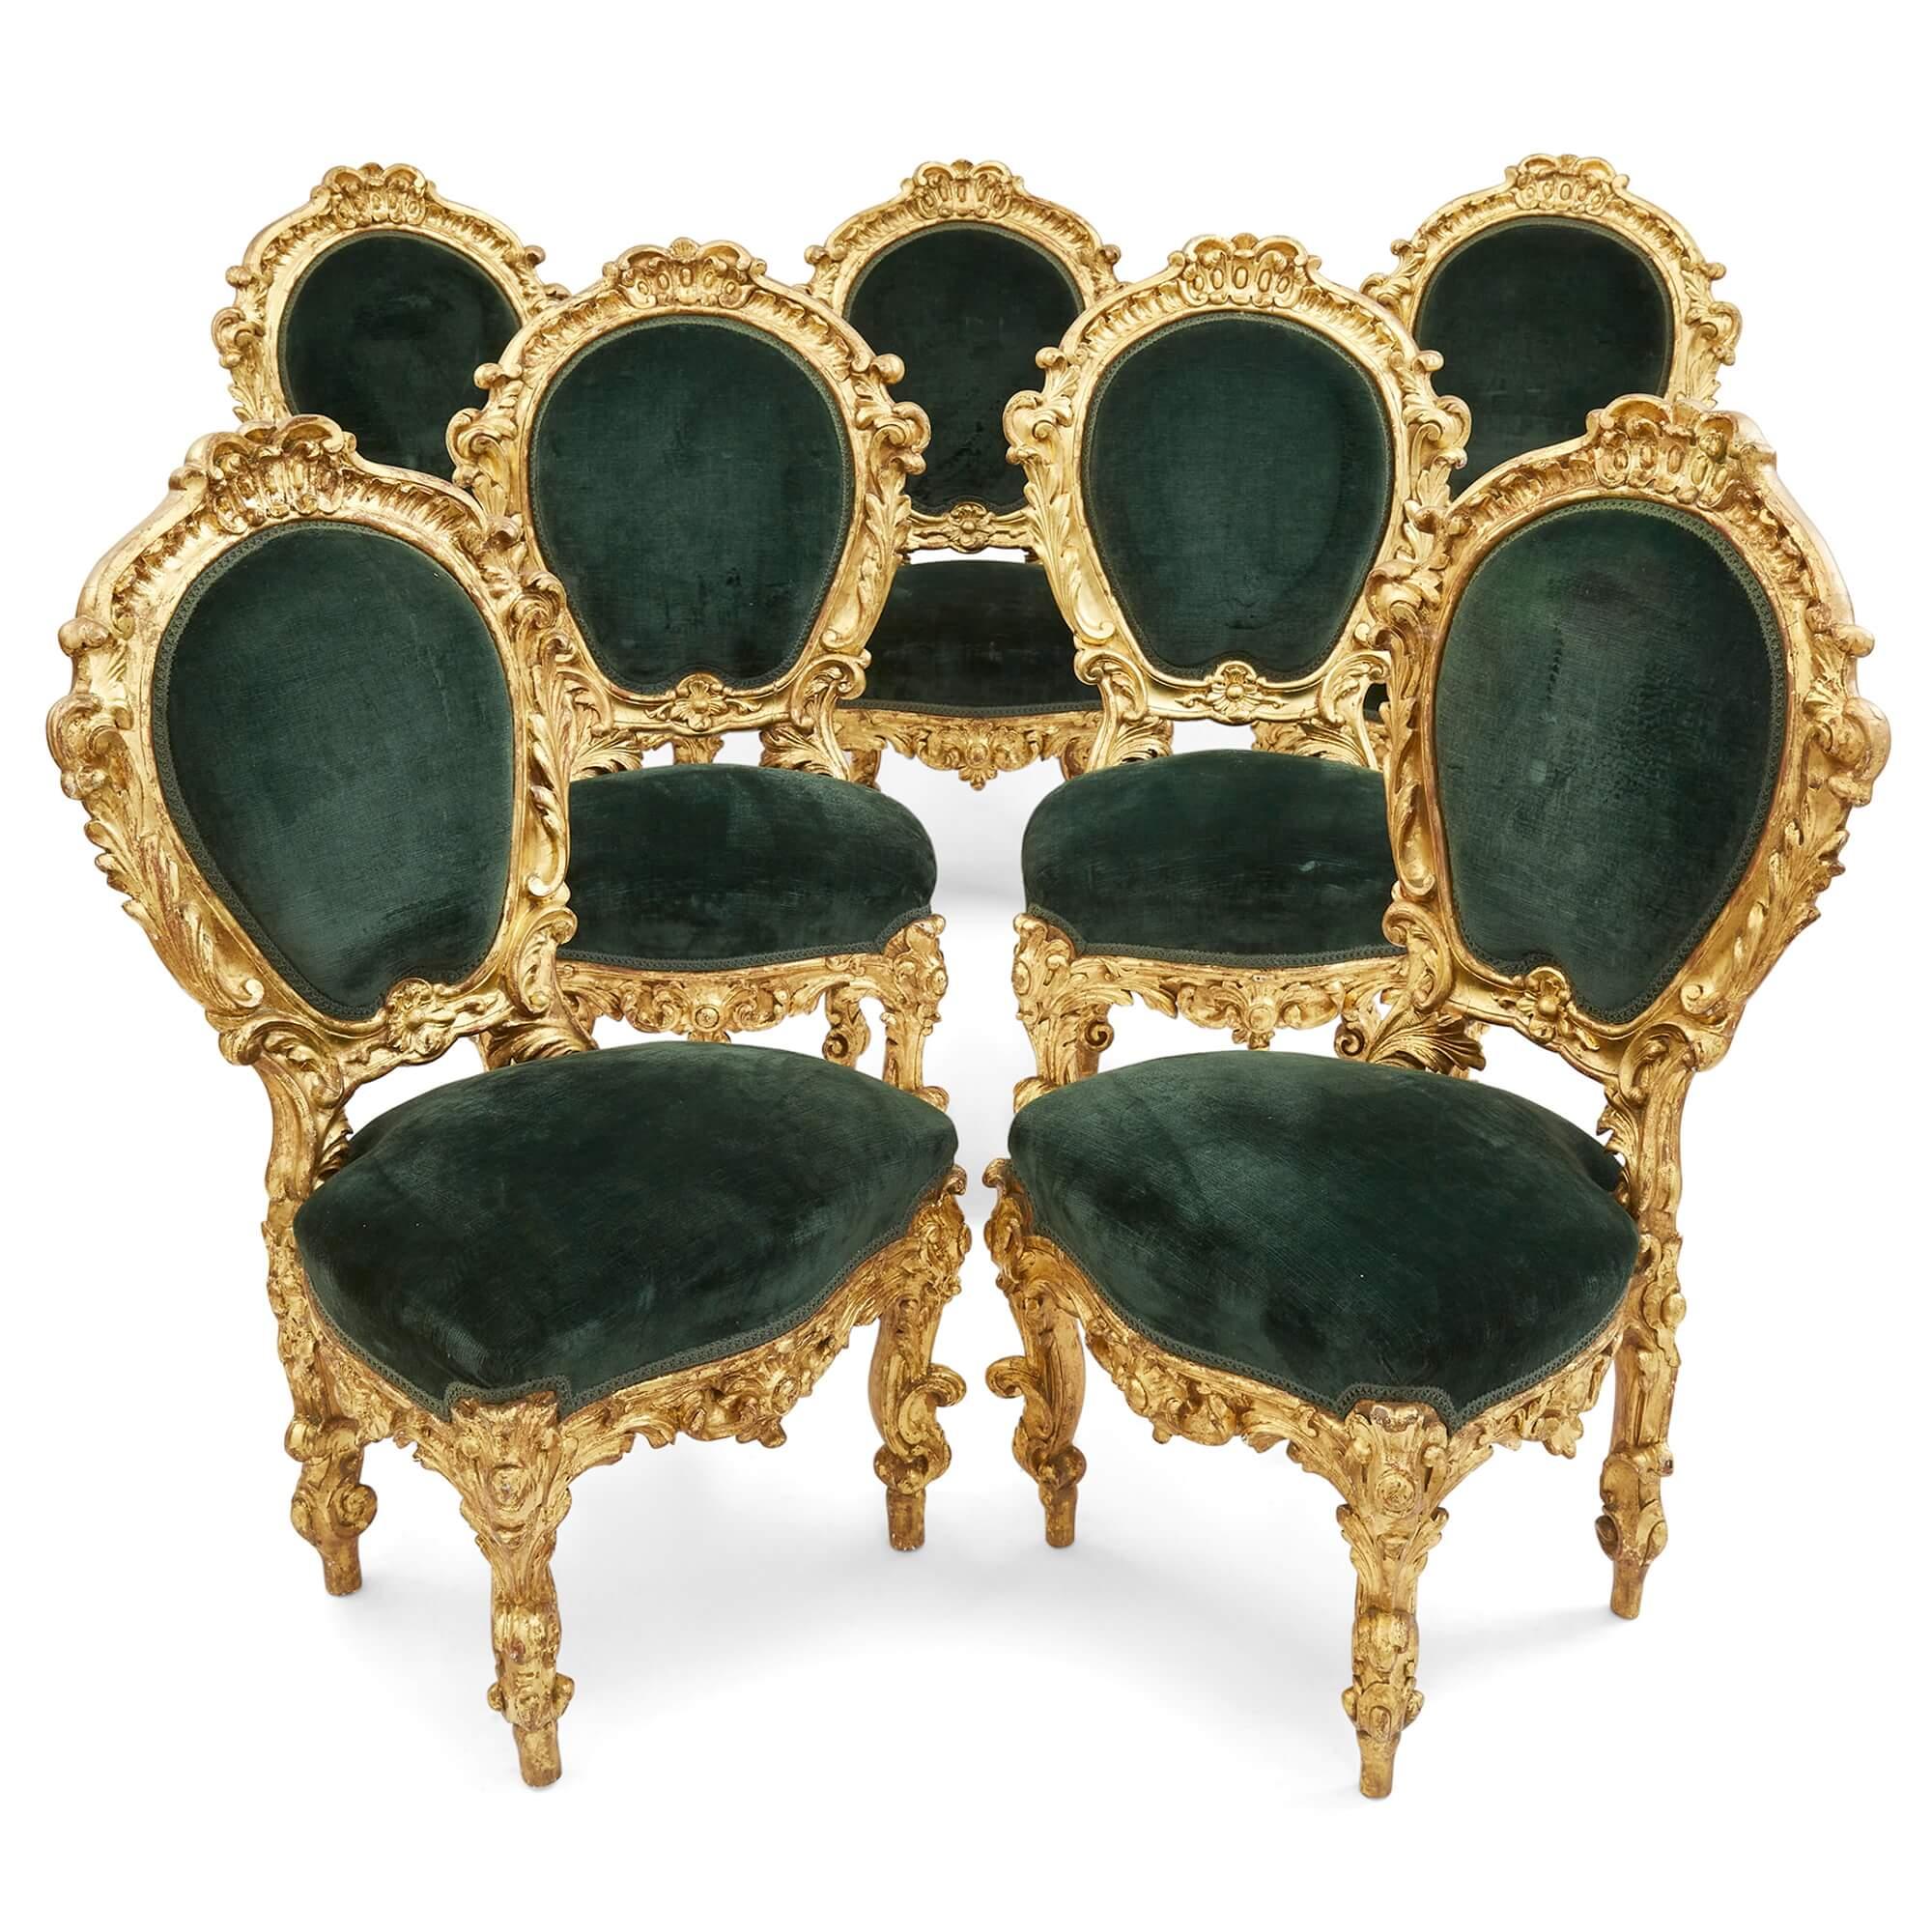 Consisting of three armchairs and seven side chairs, this superb giltwood suite was made in Italy in the nineteenth century. With slight variations in the dimensions, the ten chairs are sumptuously decorated with elaborate giltwood in a Baroque